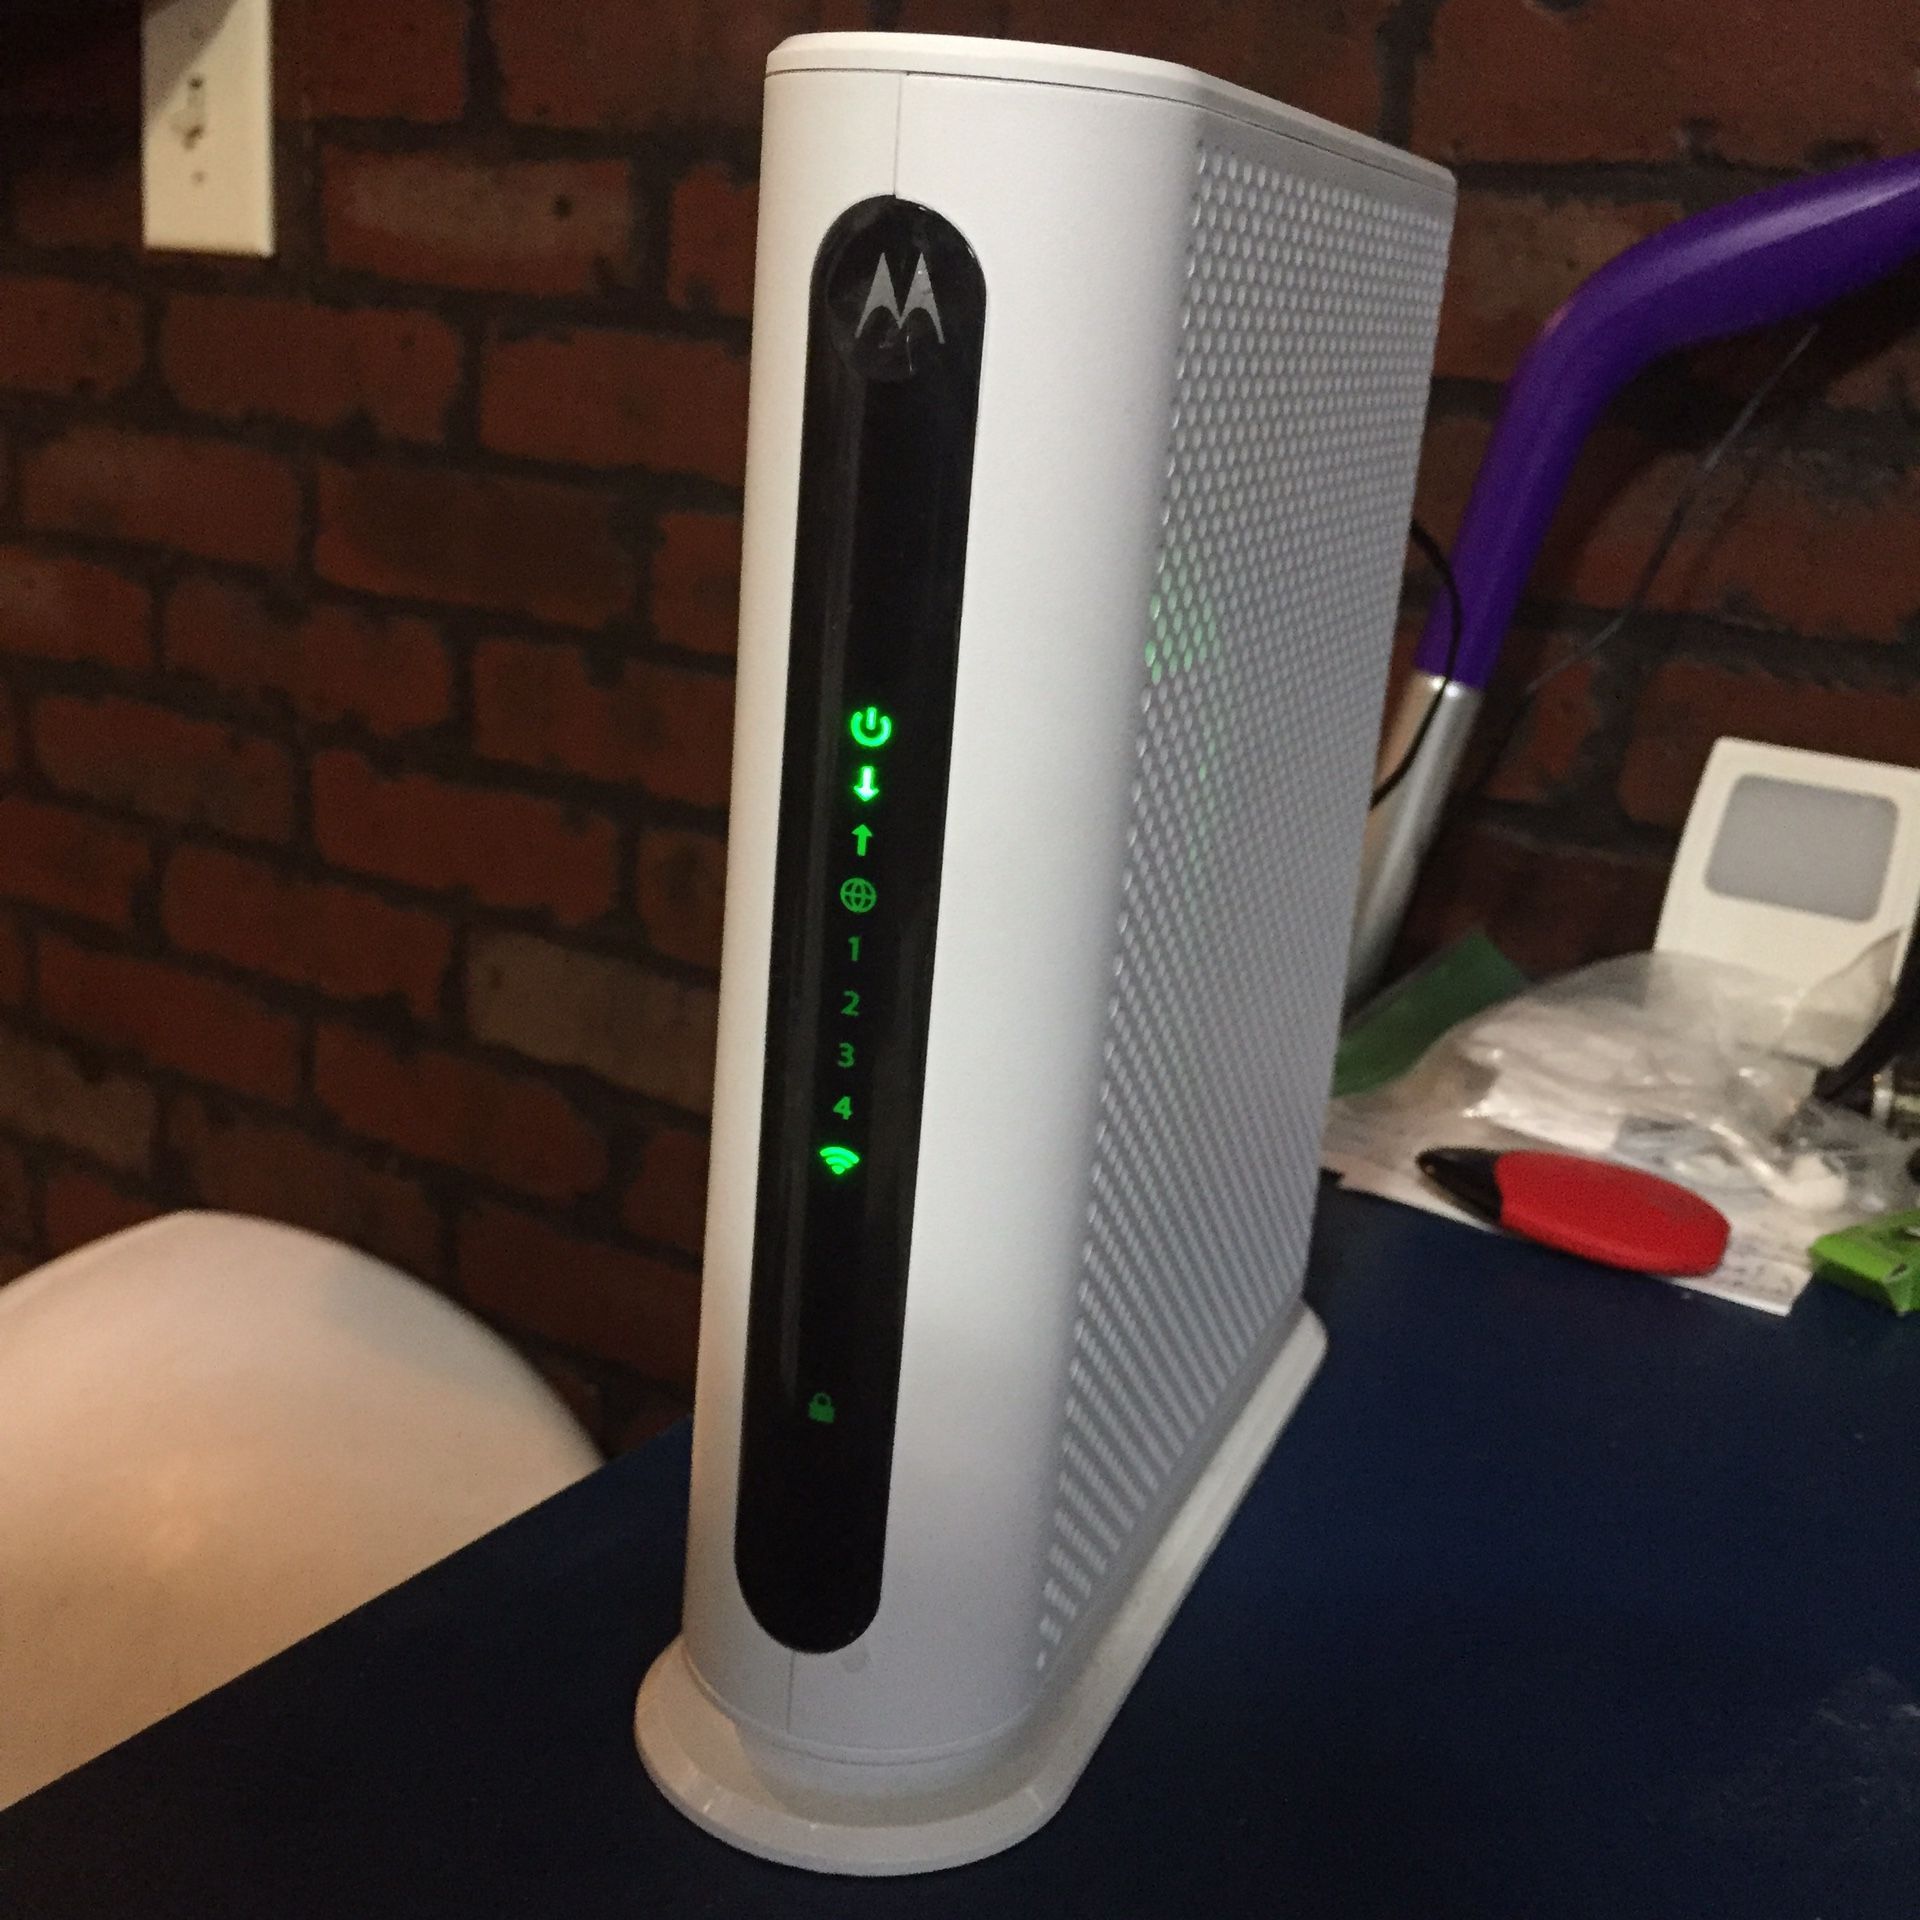 Xfinity cable modem router